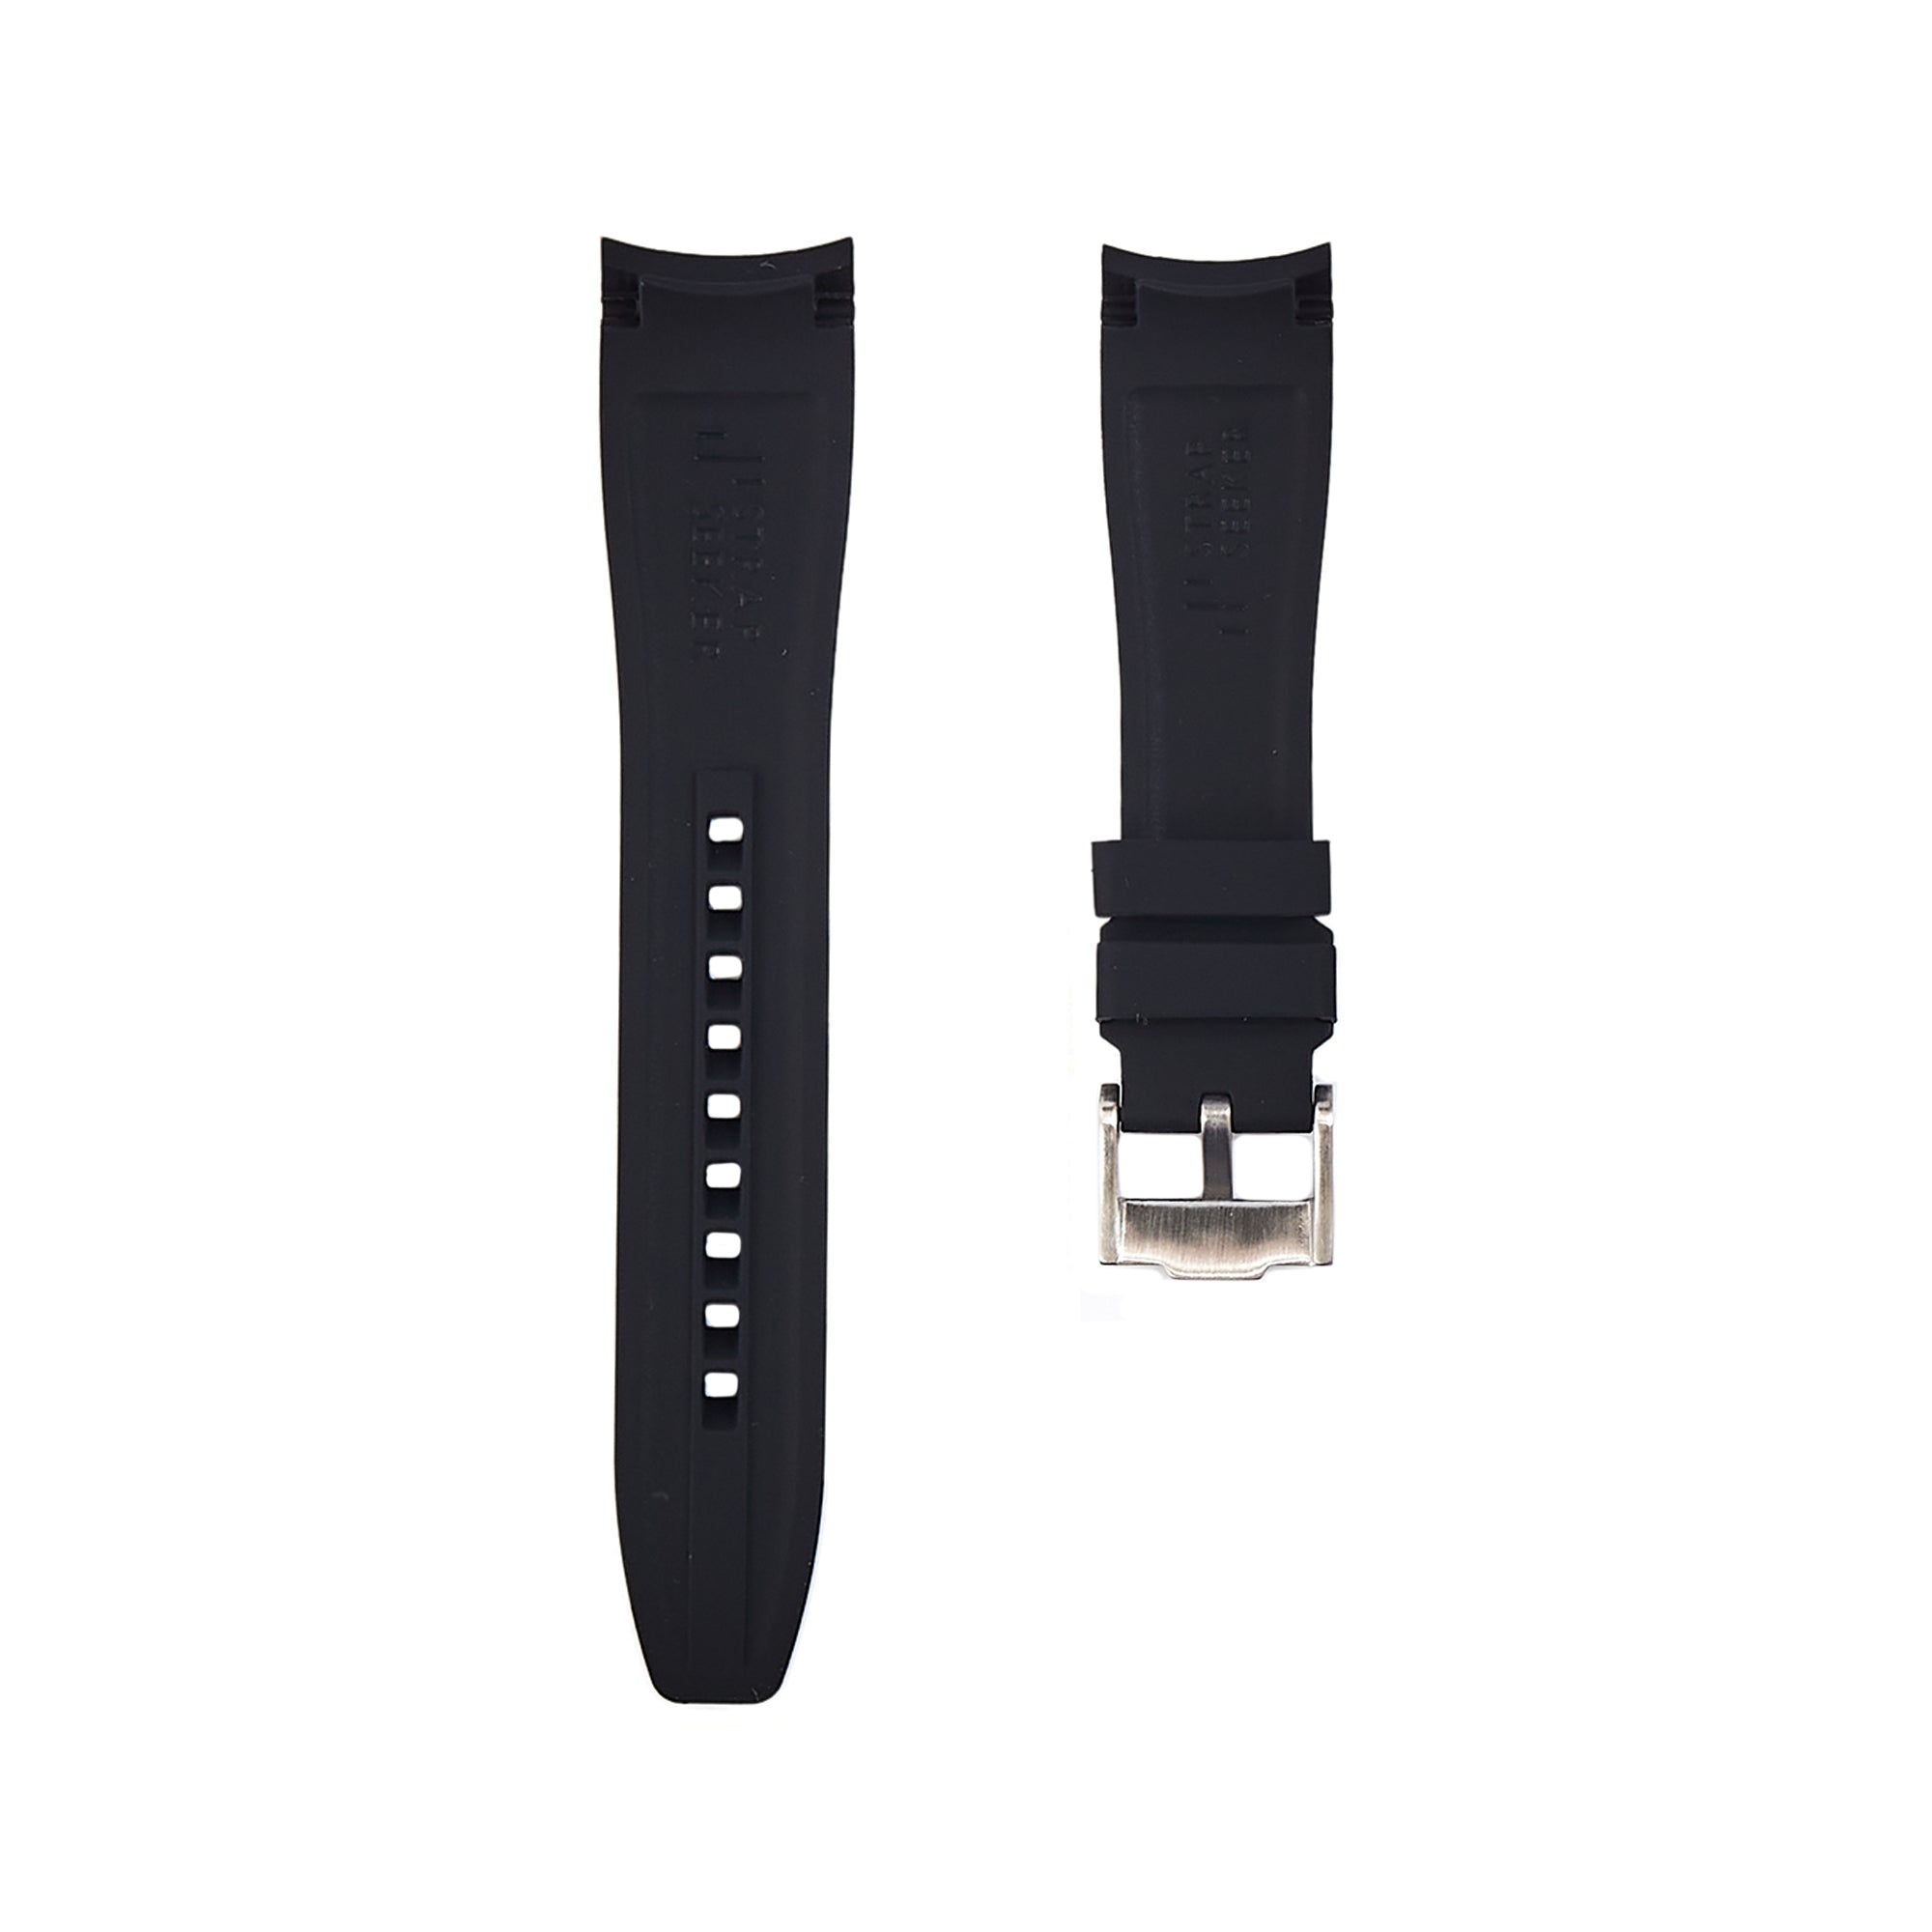 Curved End Soft Silicone Strap - Compatible with Seiko SPRK – Black (2418) -StrapSeeker